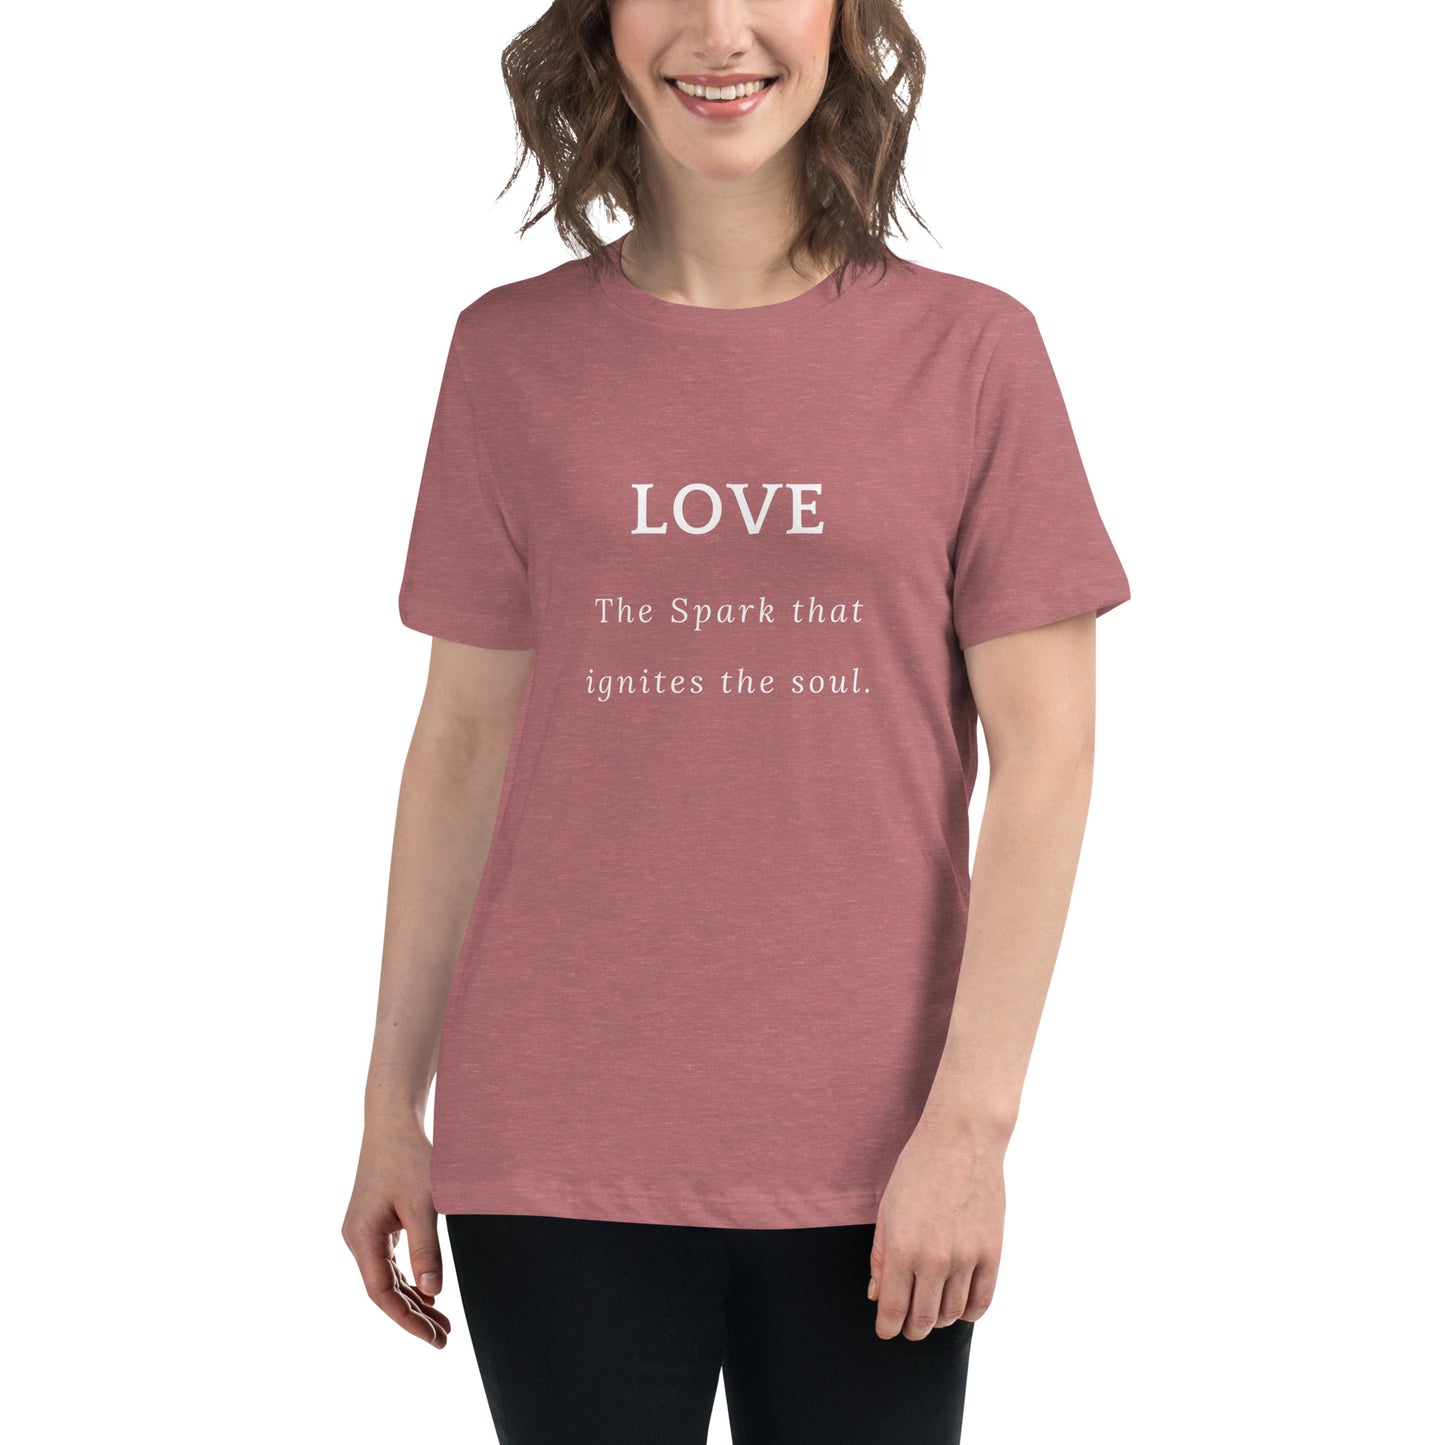 Women's Relaxed T-Shirt, Love, the spark that ignites the soul